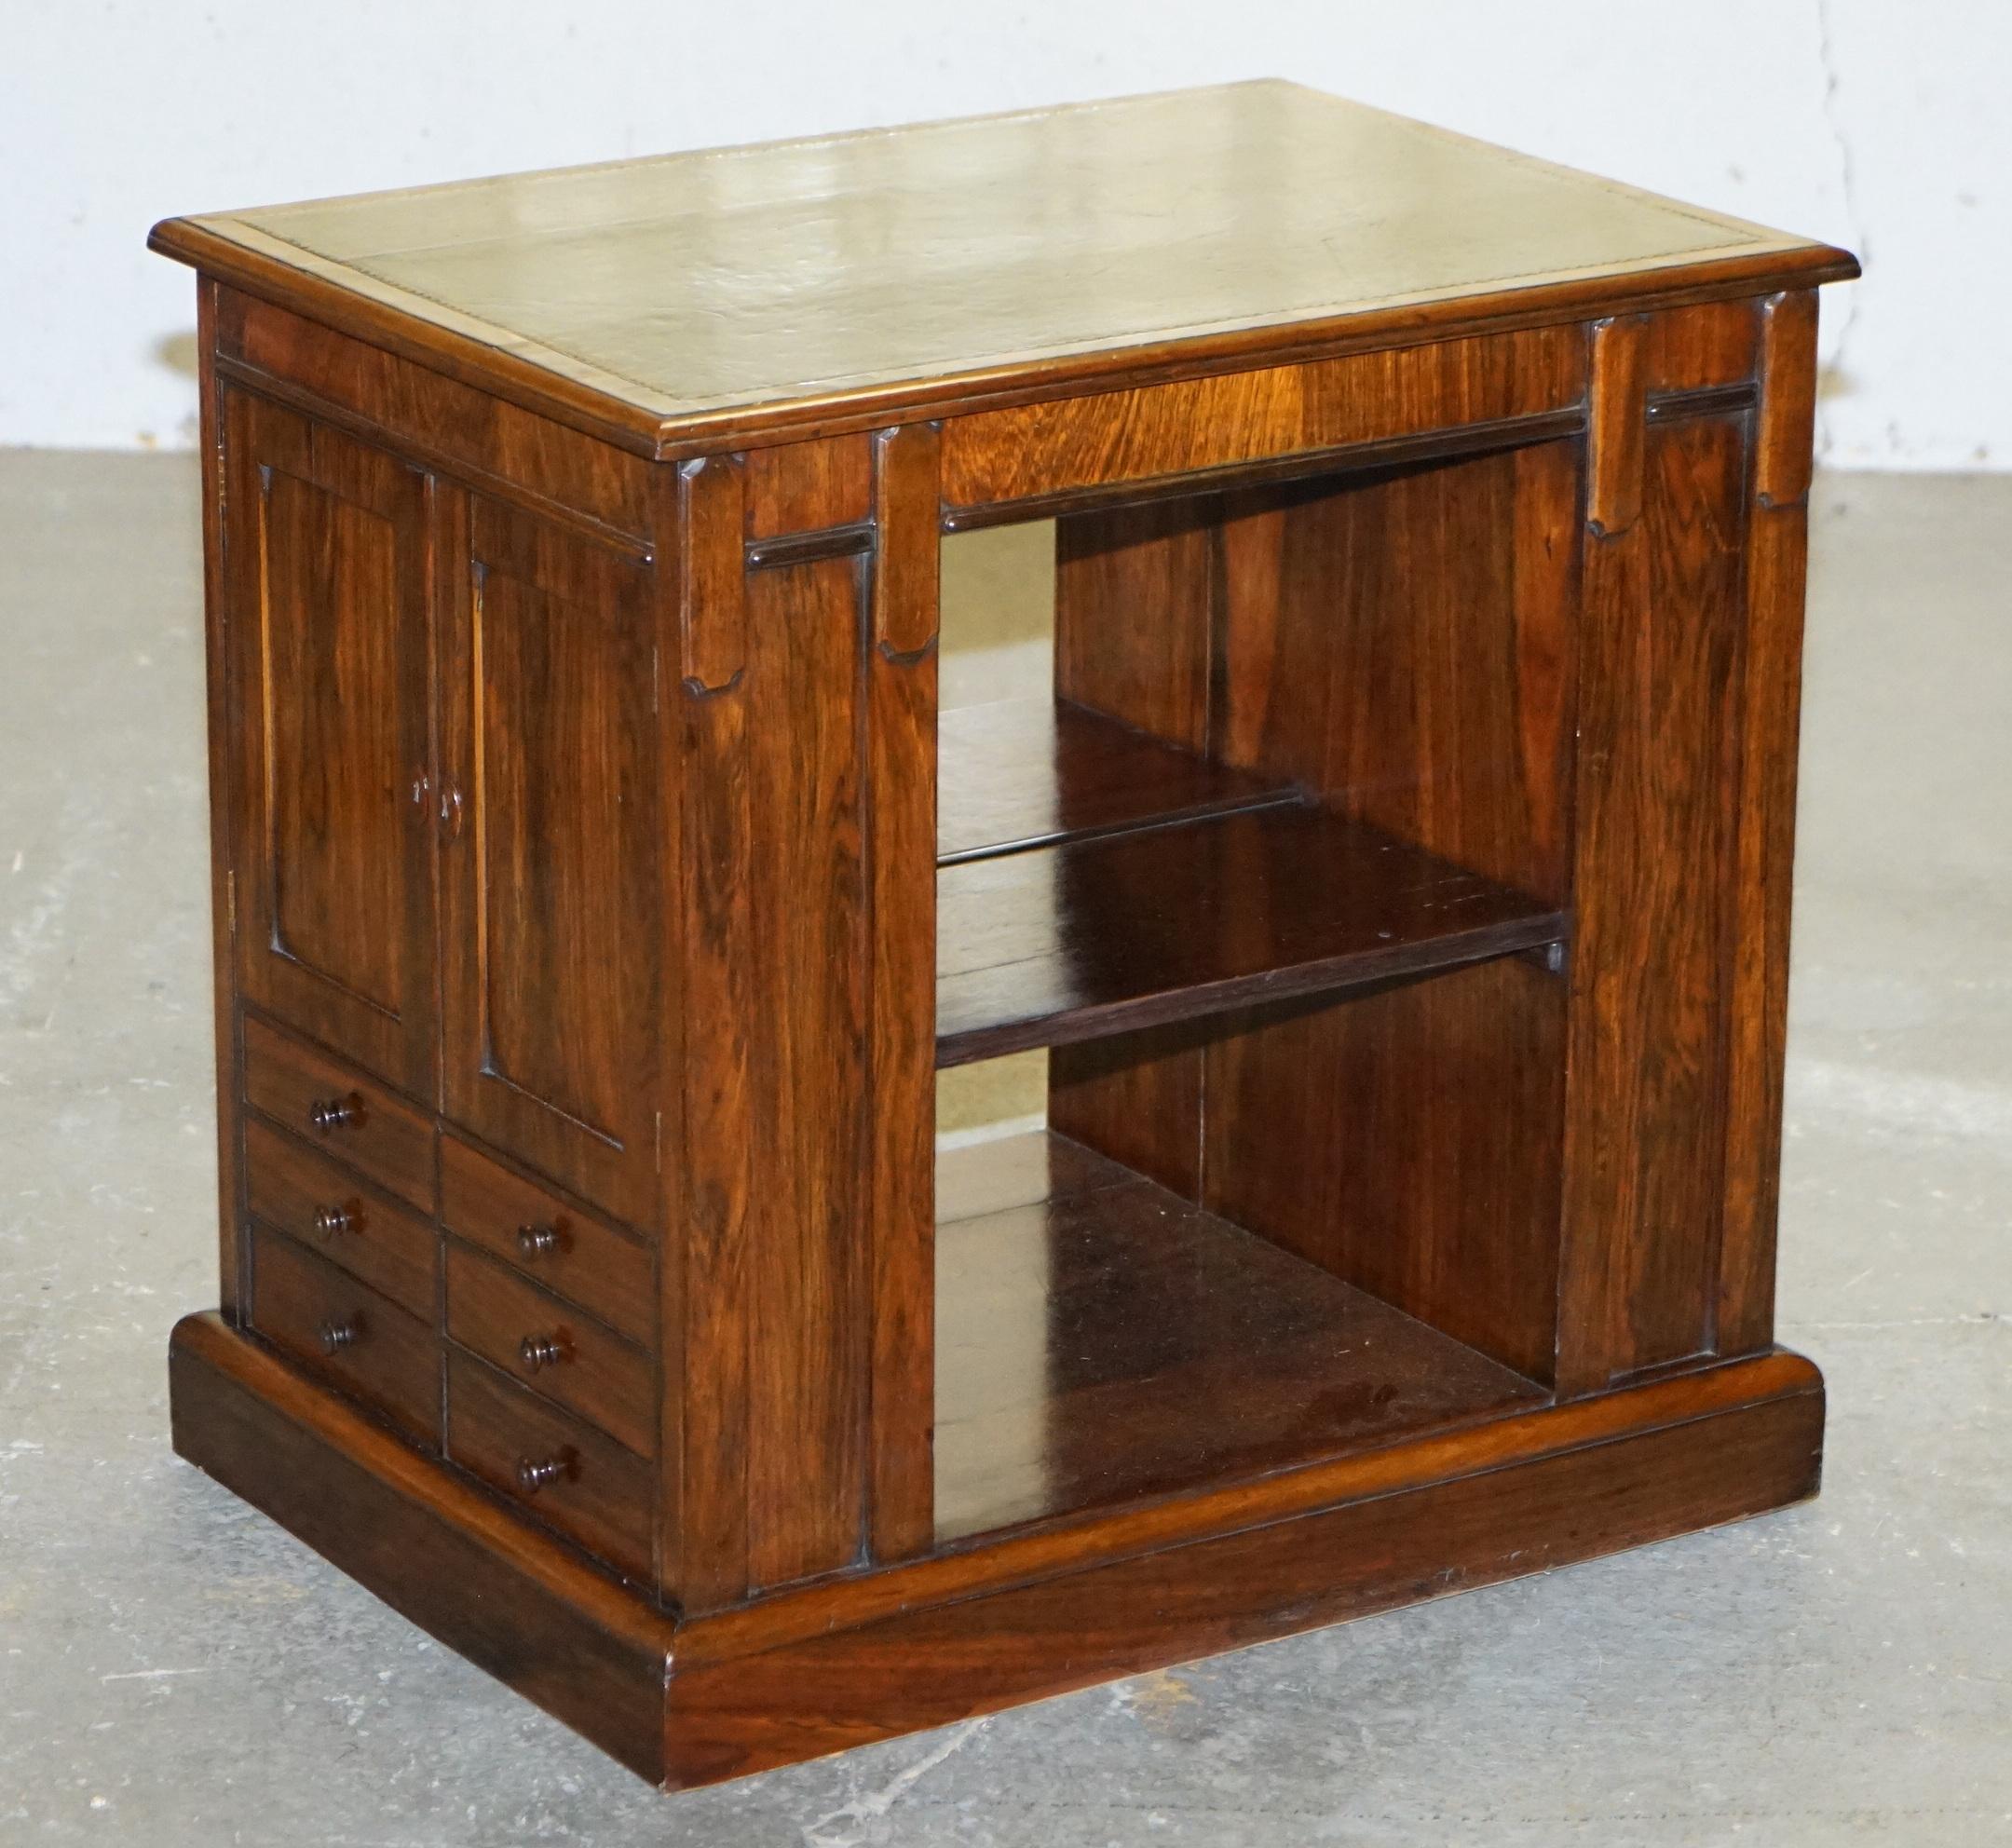 English RARE WILLIAM IV CIRCA 1830 HARDWOOD LIBRARY FOLIO CABiNET WITH DRAWERS BOOKCASE For Sale